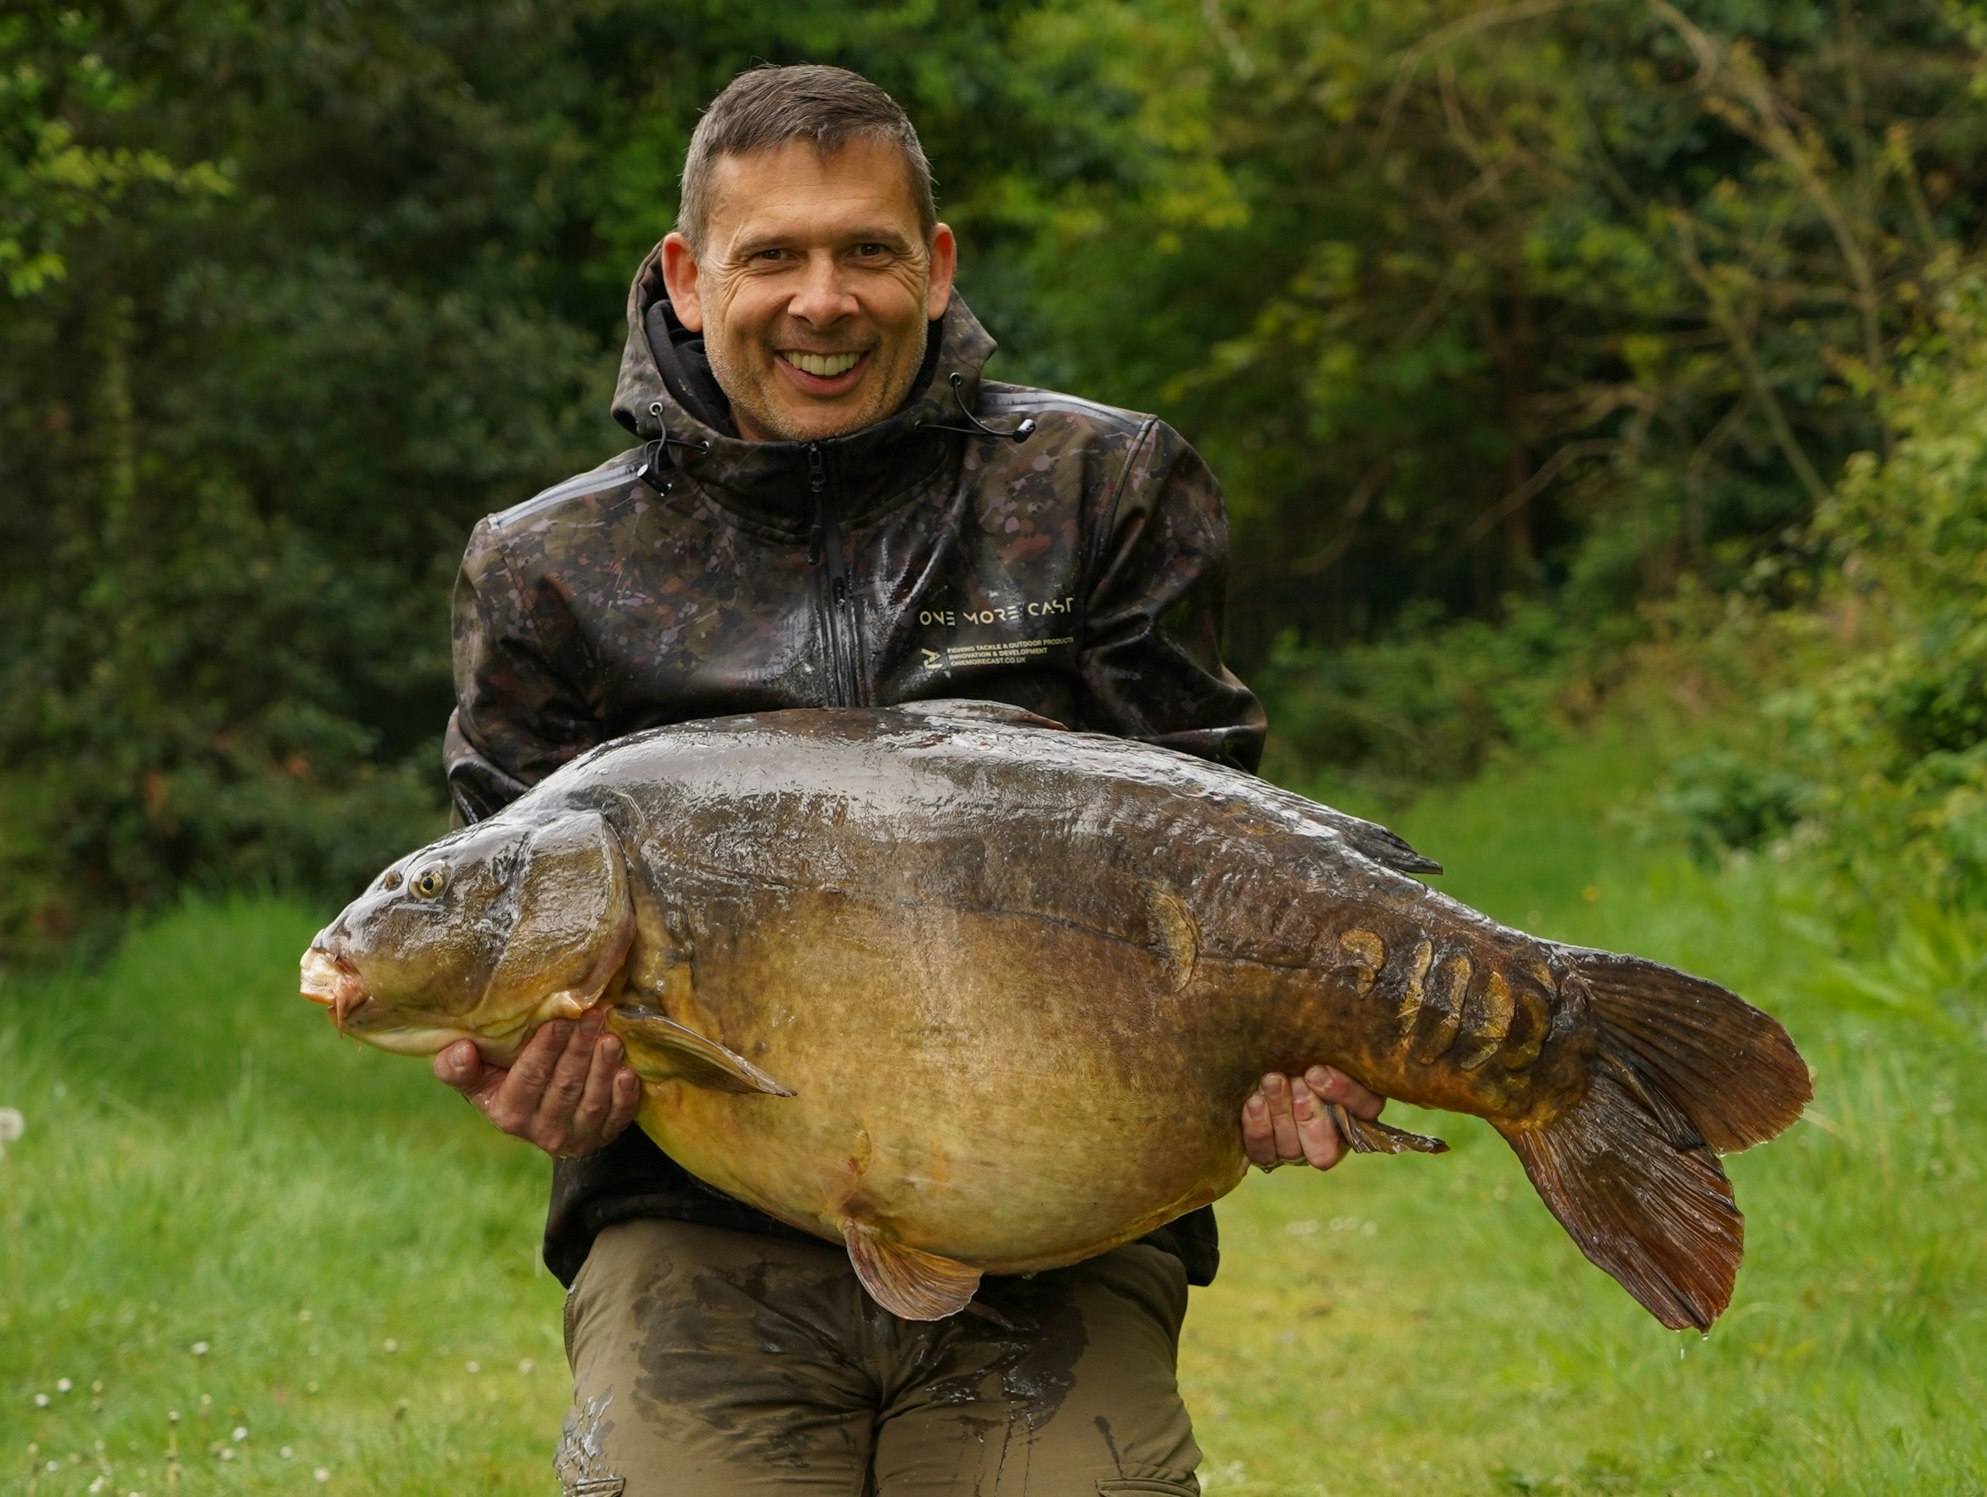 Steve, elated with his recent capture of Roger at 56lb 1oz.